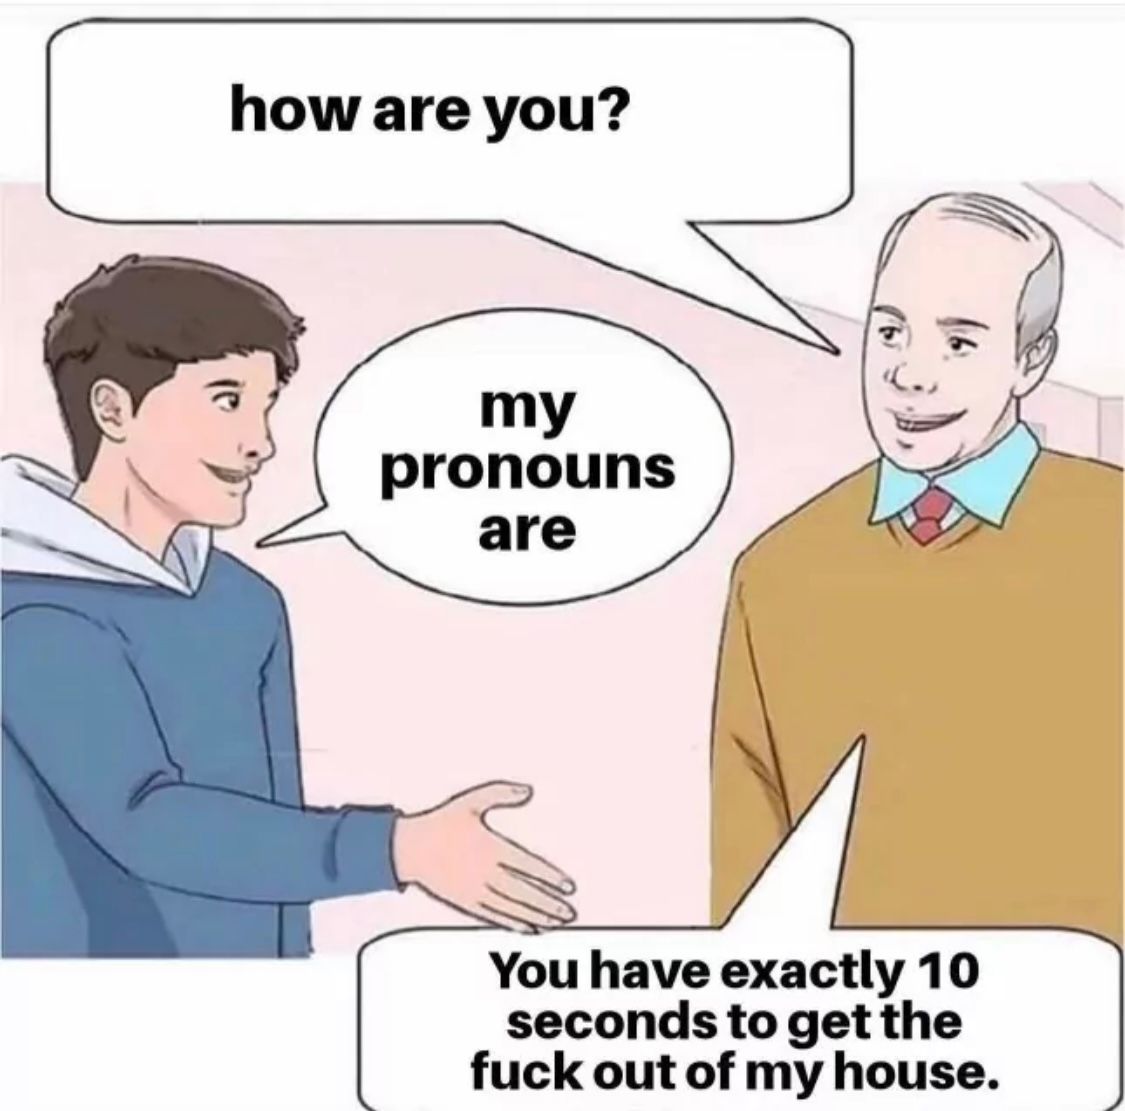 how are you?
my
pronouns
are
You have exactly 10
seconds to get the
fuck out of my house.